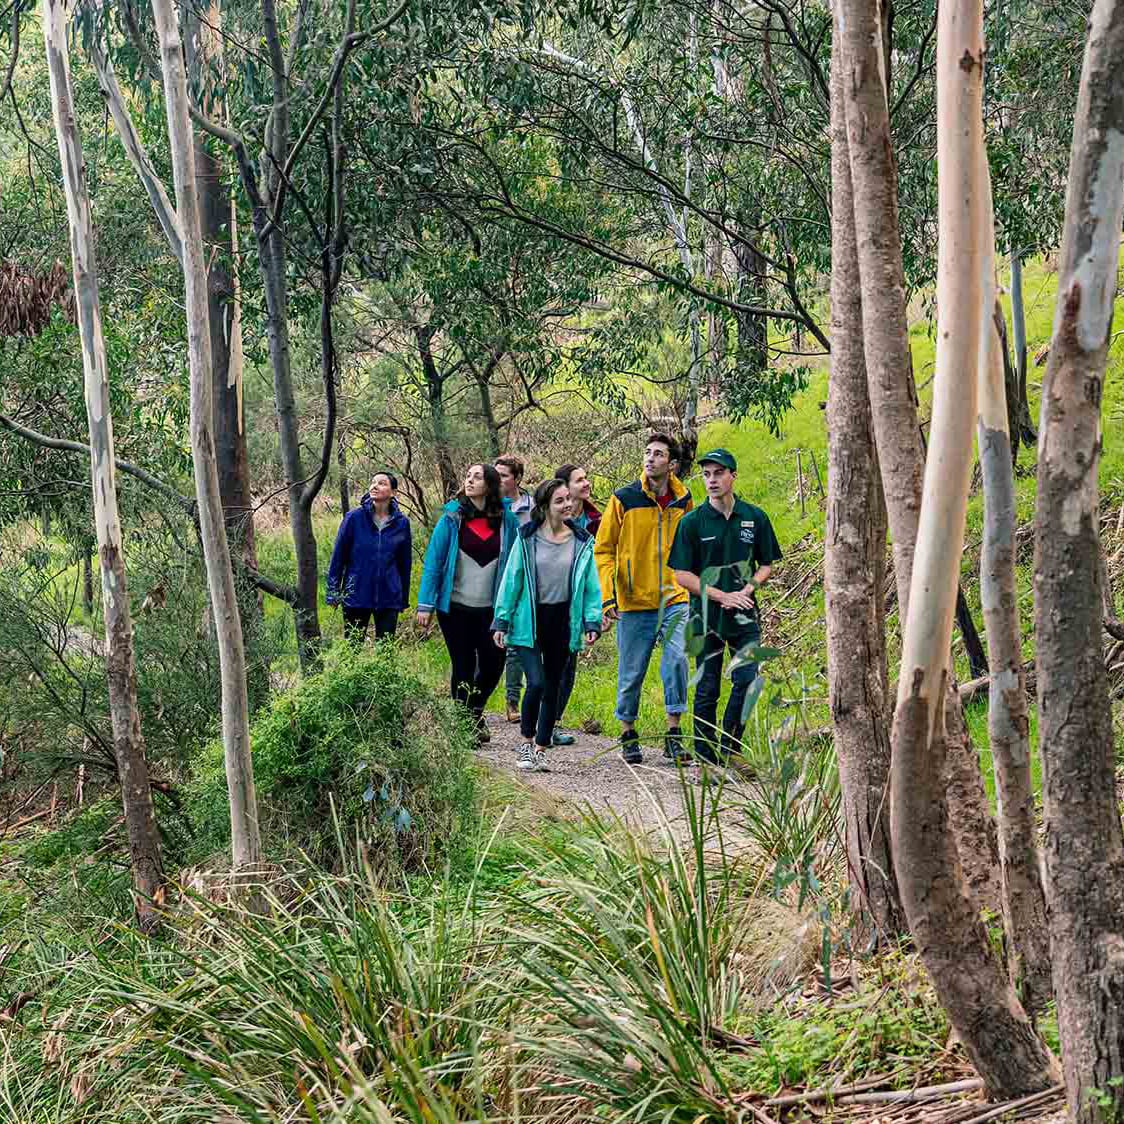 A group of people walking along a path through the forest with a volunteer guide.